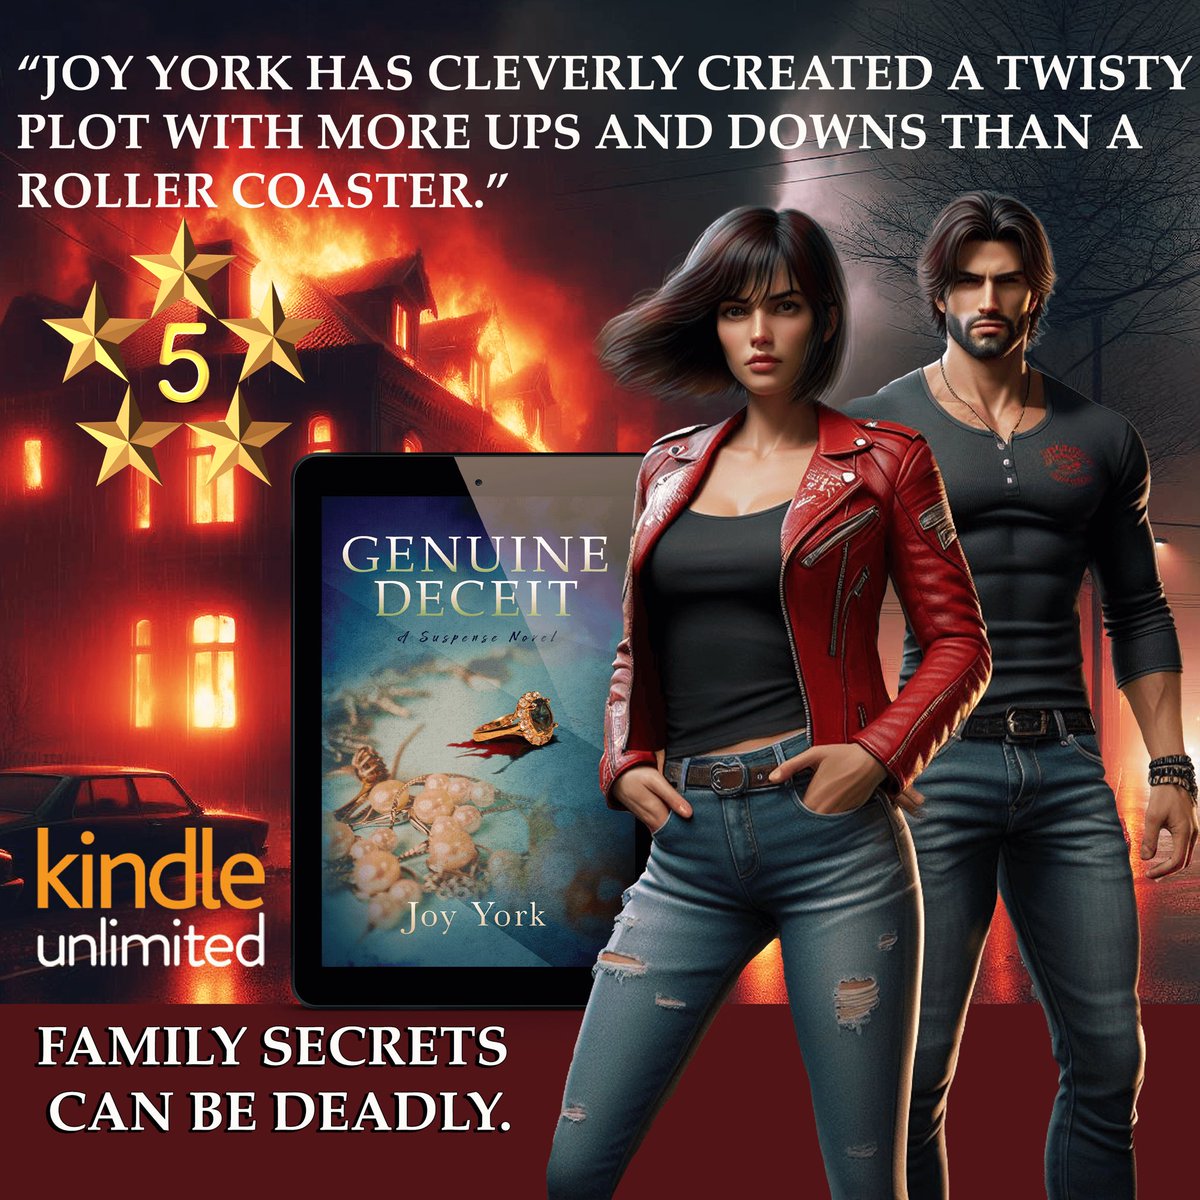 GENUINE DECEIT by Joy York Amazon Review: ⭐️⭐️⭐️⭐️⭐️ “It’s a real page-turner with a superb finale.” When a young woman finds herself unknowingly accountable for the past sins of her family, she must unravel their secrets and lies to stay alive. #thriller #mystery #CrimeFiction…